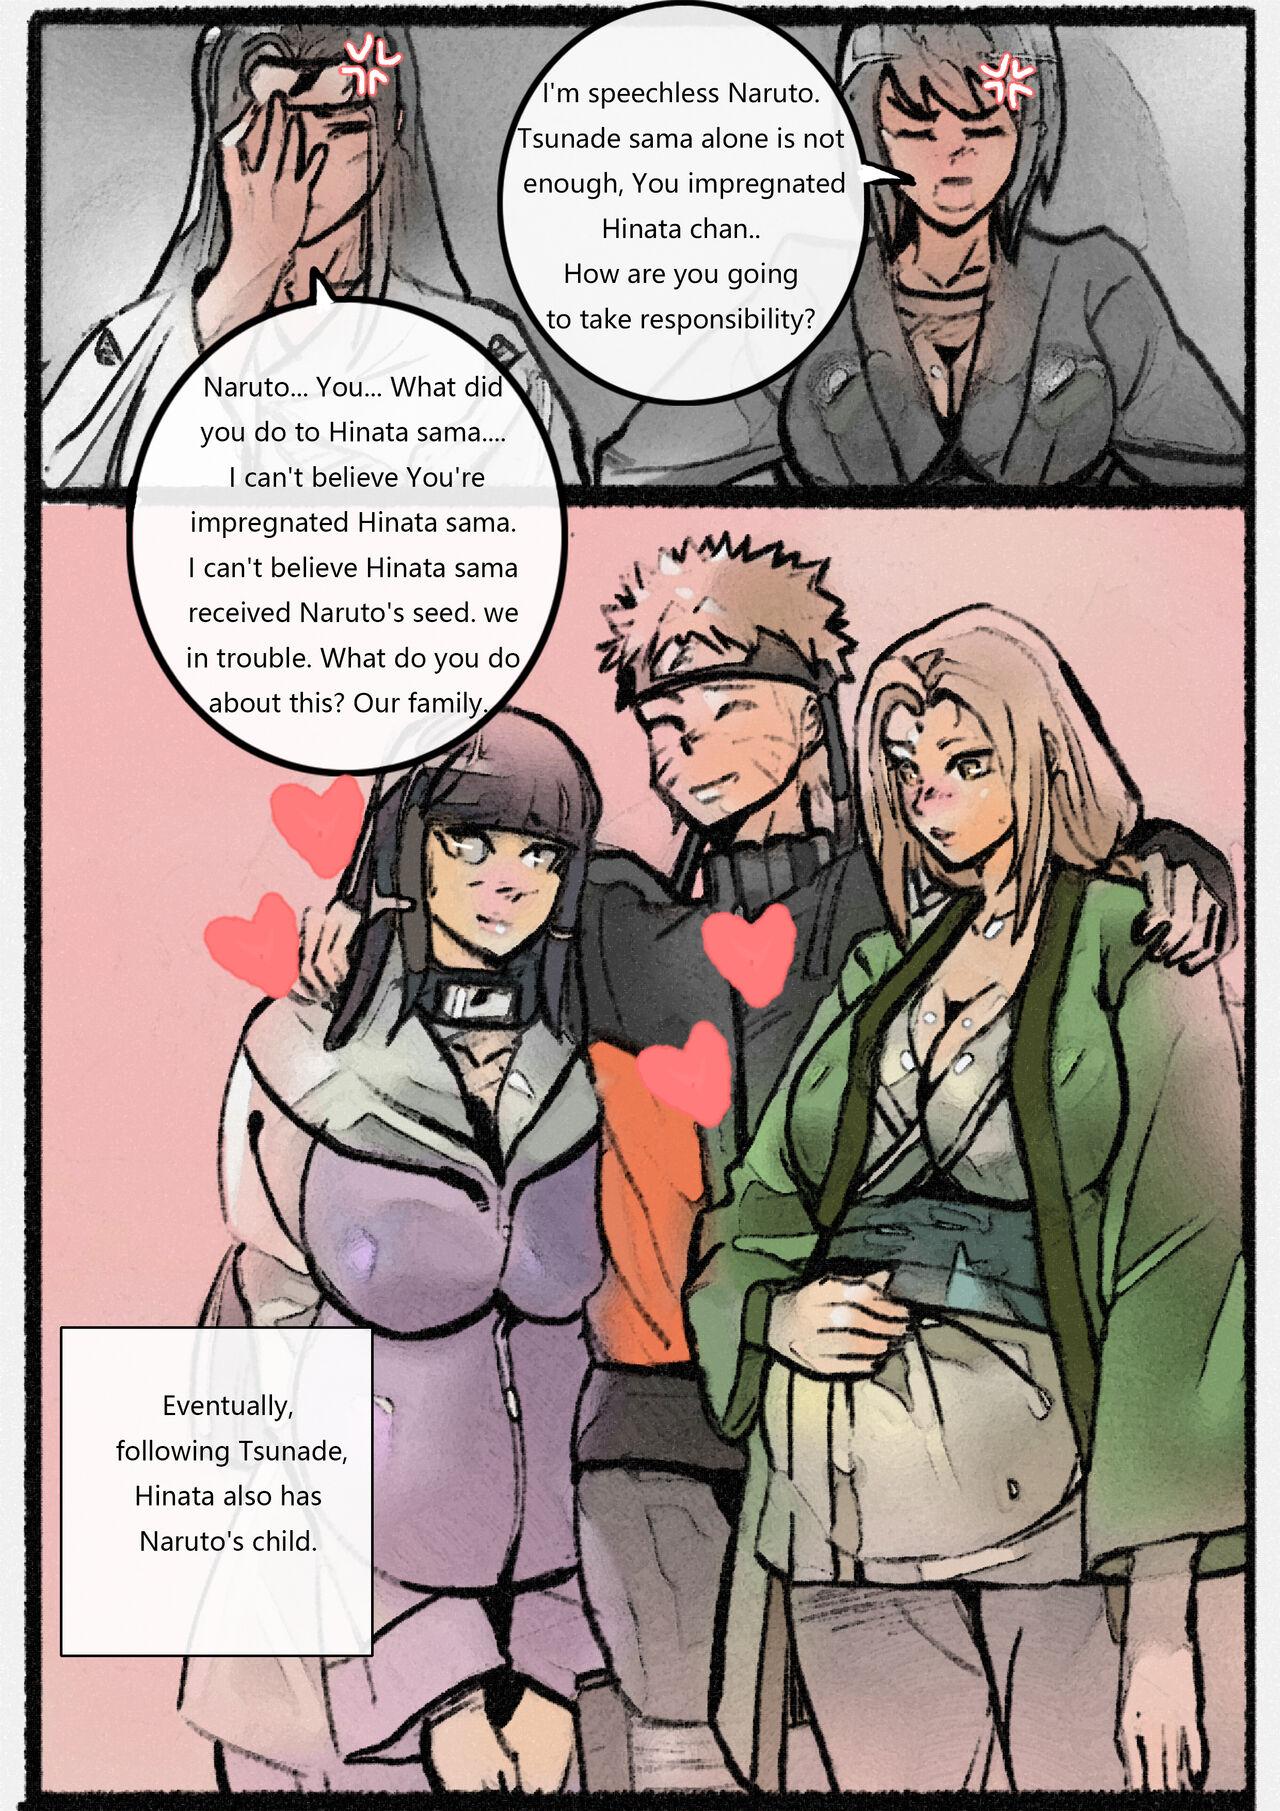 Wet Cunts Naruto Wants Tsunade to Help Him Graduate From His Virginity - Naruto Phat - Page 19